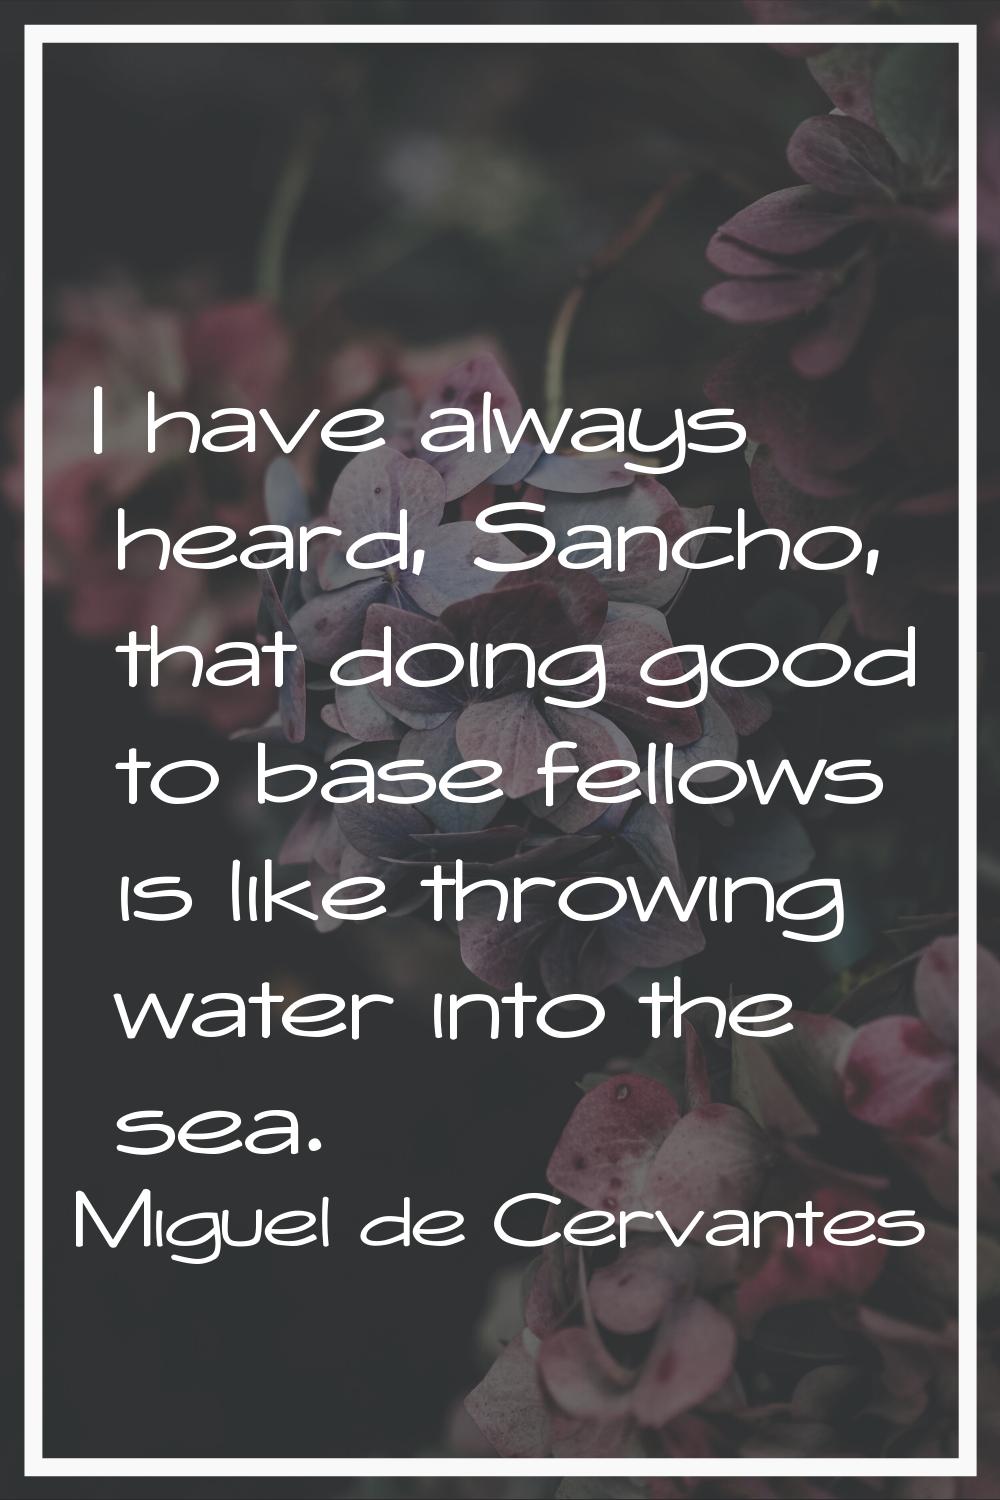 I have always heard, Sancho, that doing good to base fellows is like throwing water into the sea.